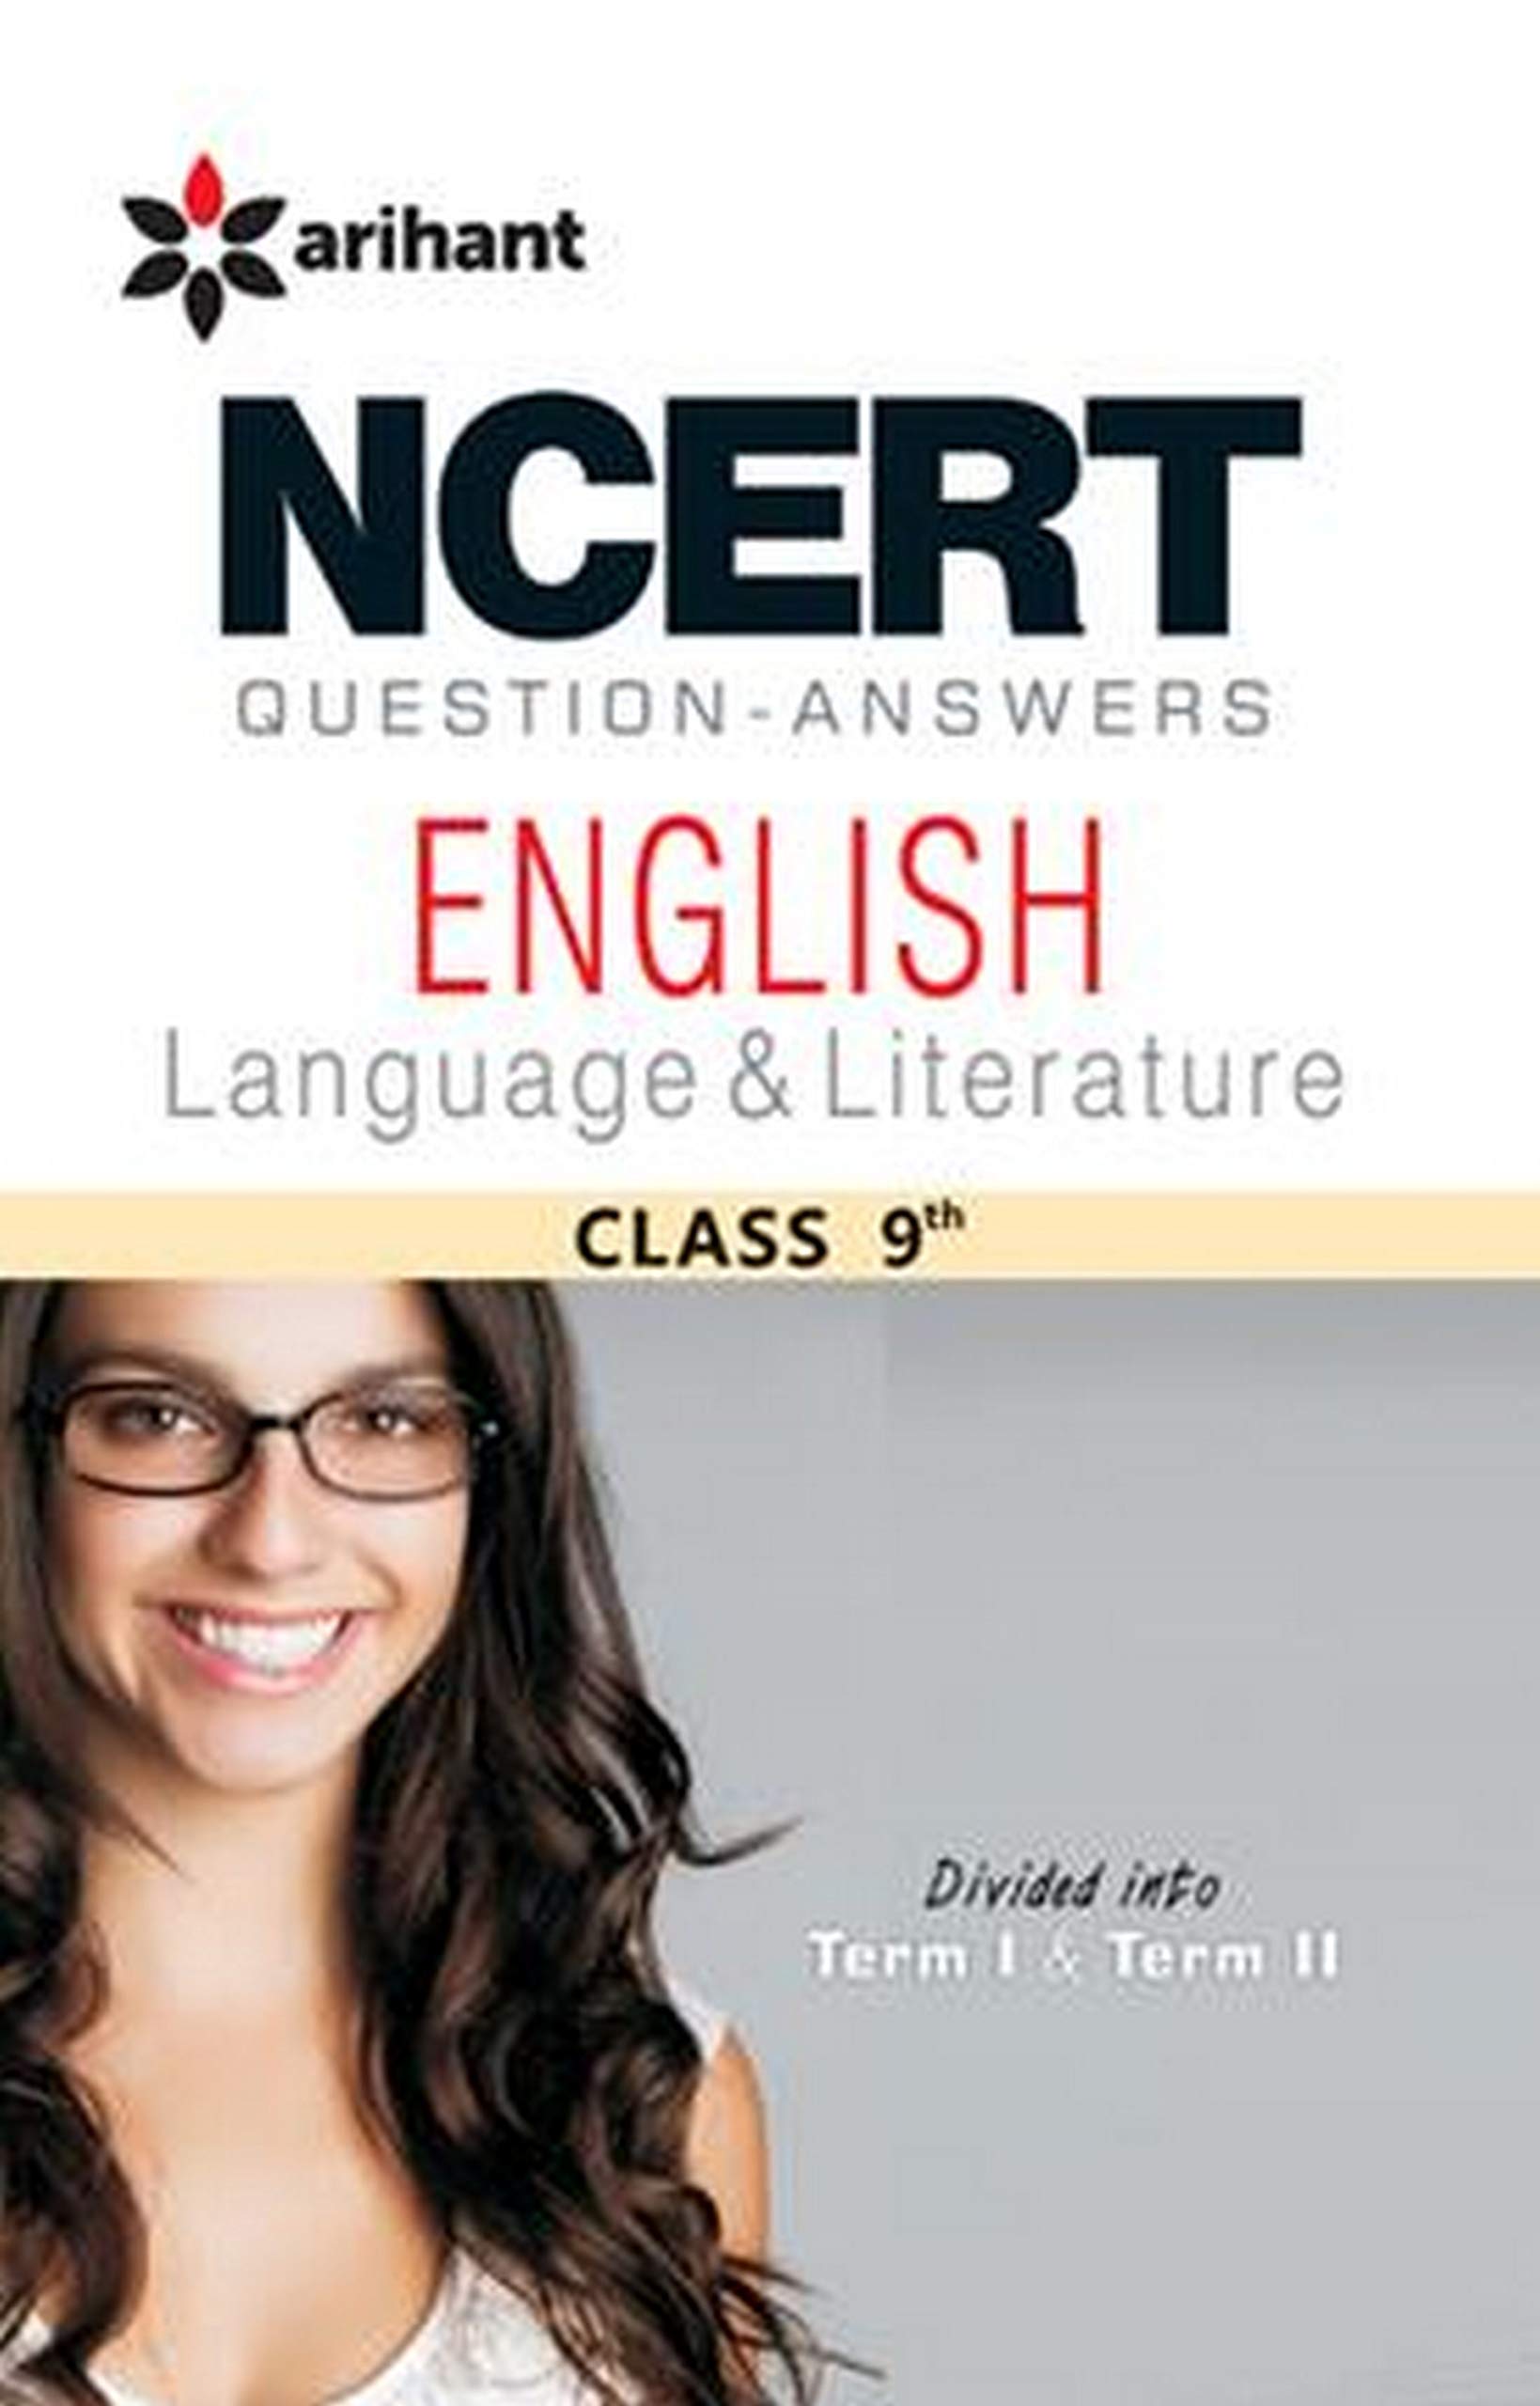 NCERT Questions-Answers ENGLISH LANGUAGE & LITERATURE Class 9th